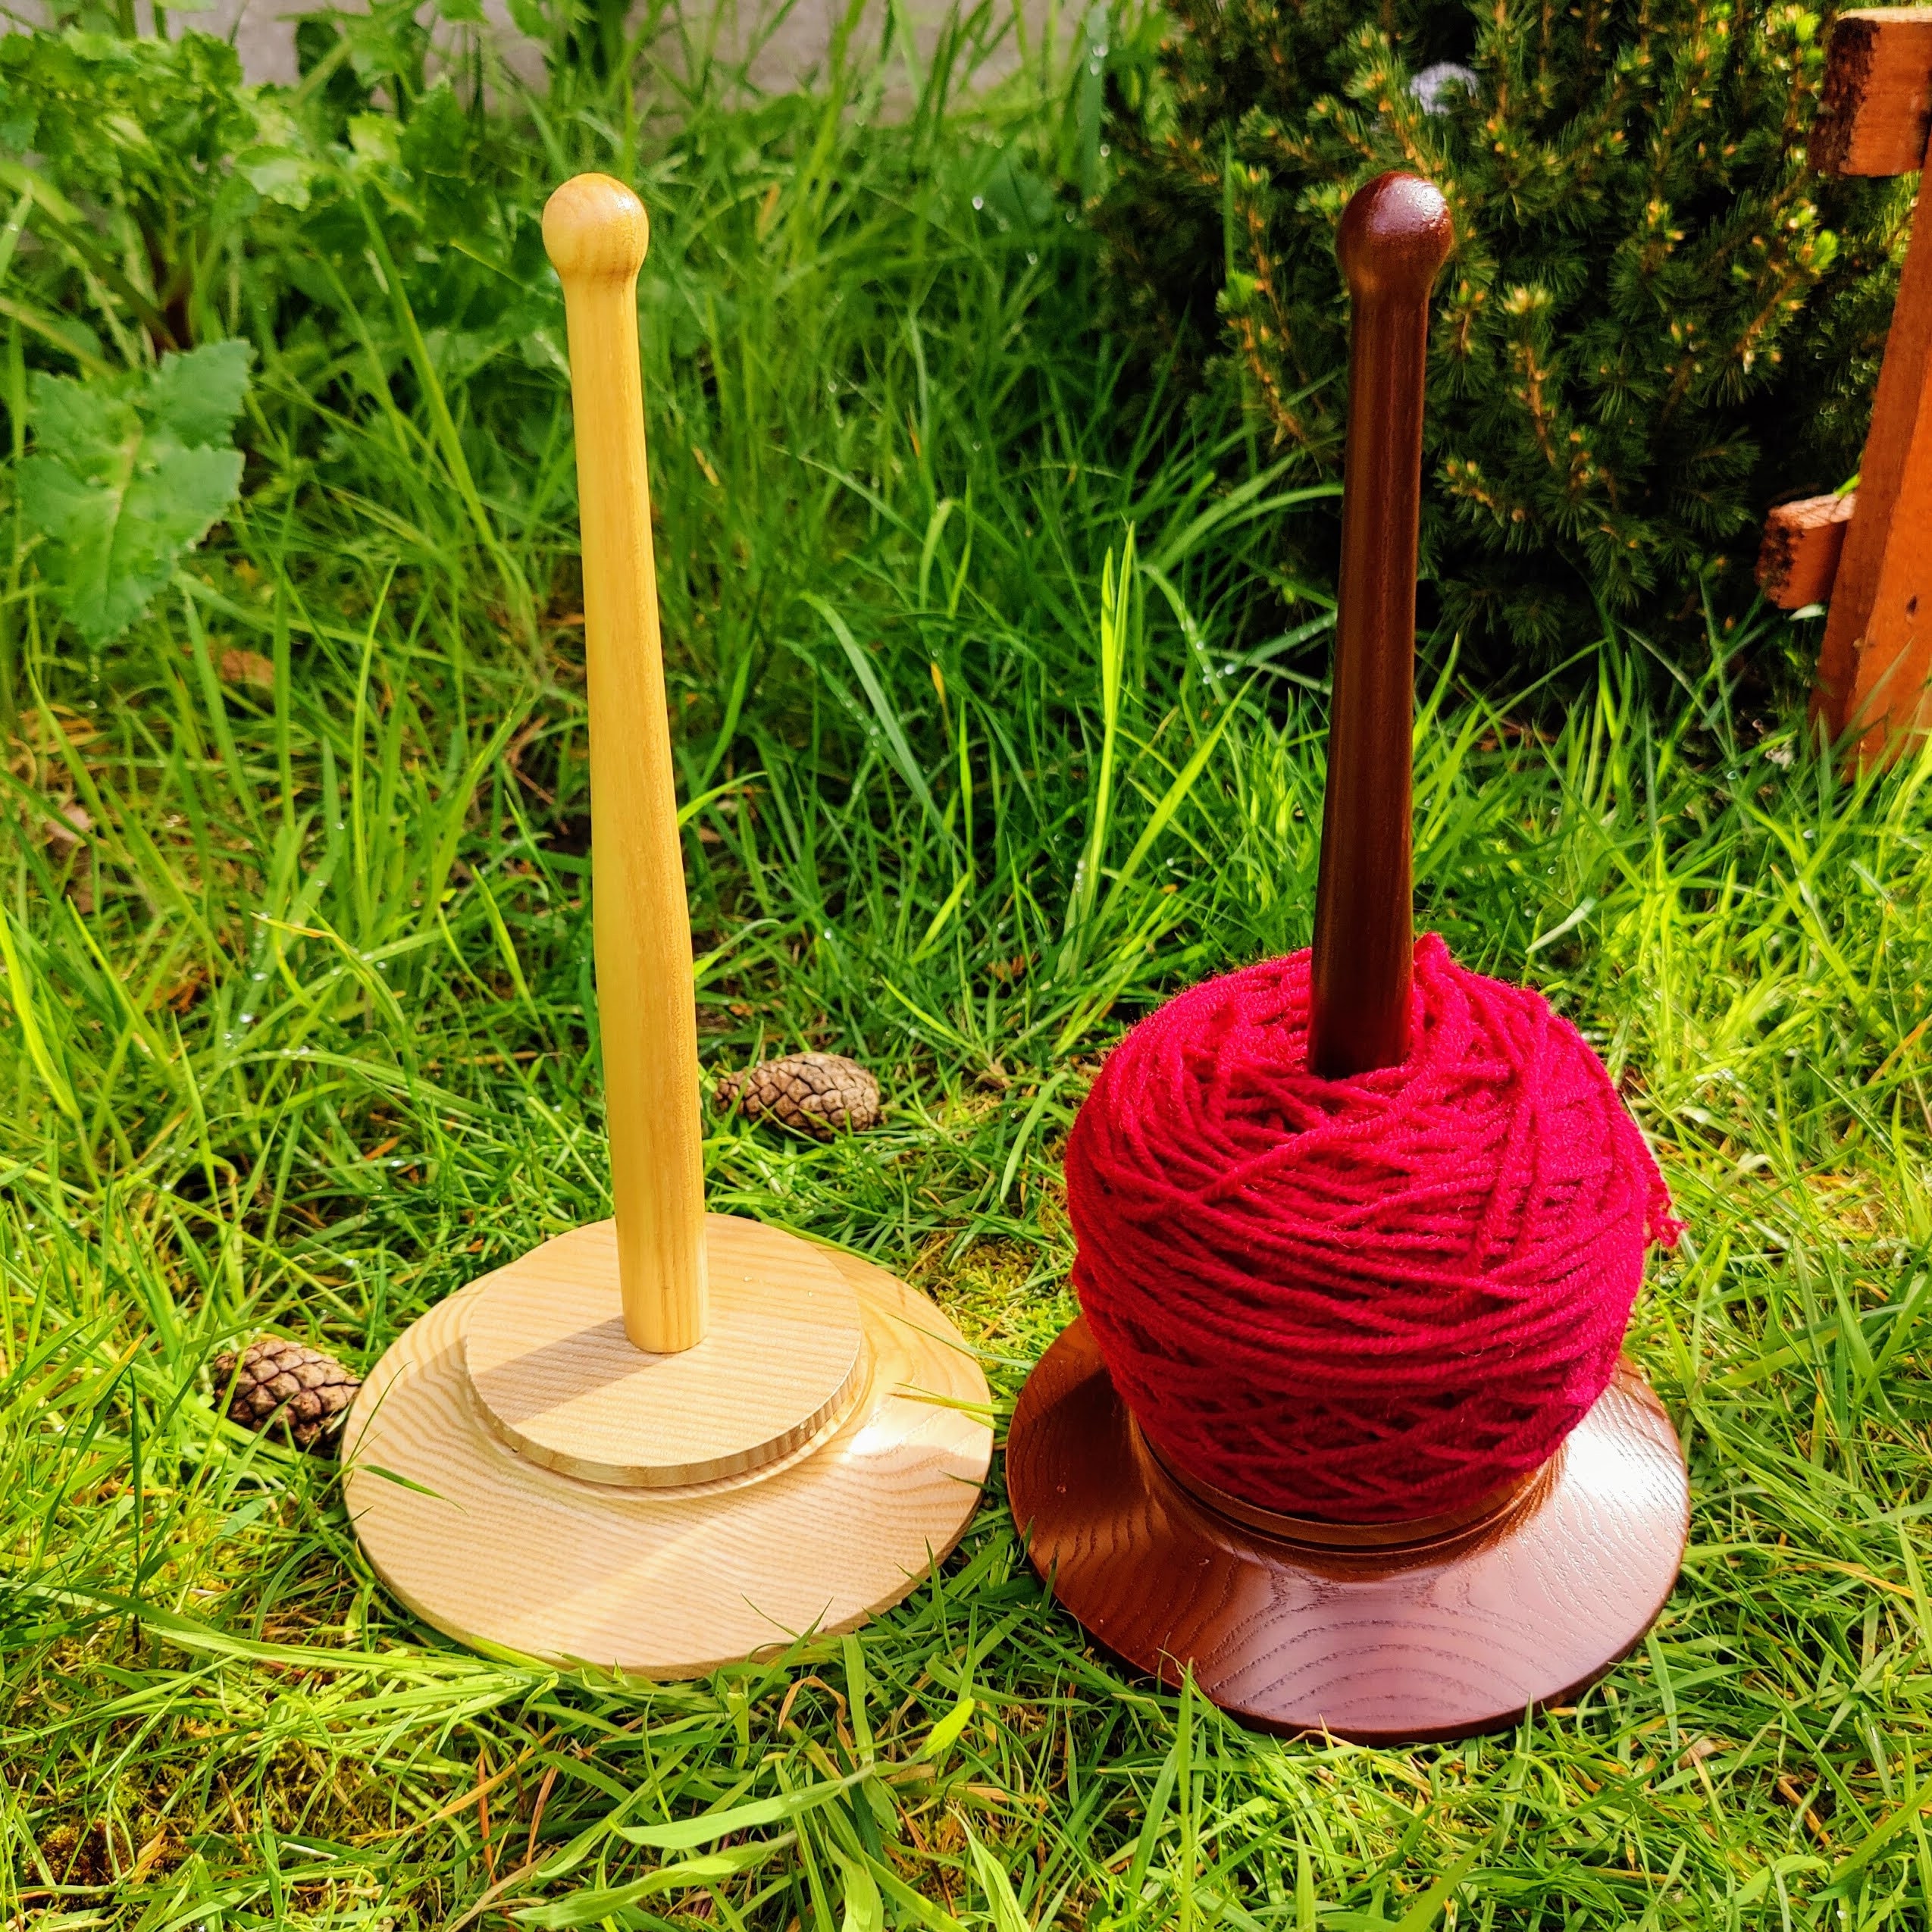 Wool Jeanie the Magnetic Yarn Ball Holder Which Feeds by Revolving the Wool  for Knitting and Crocheting Also Additional Spindles and Bases -   Singapore